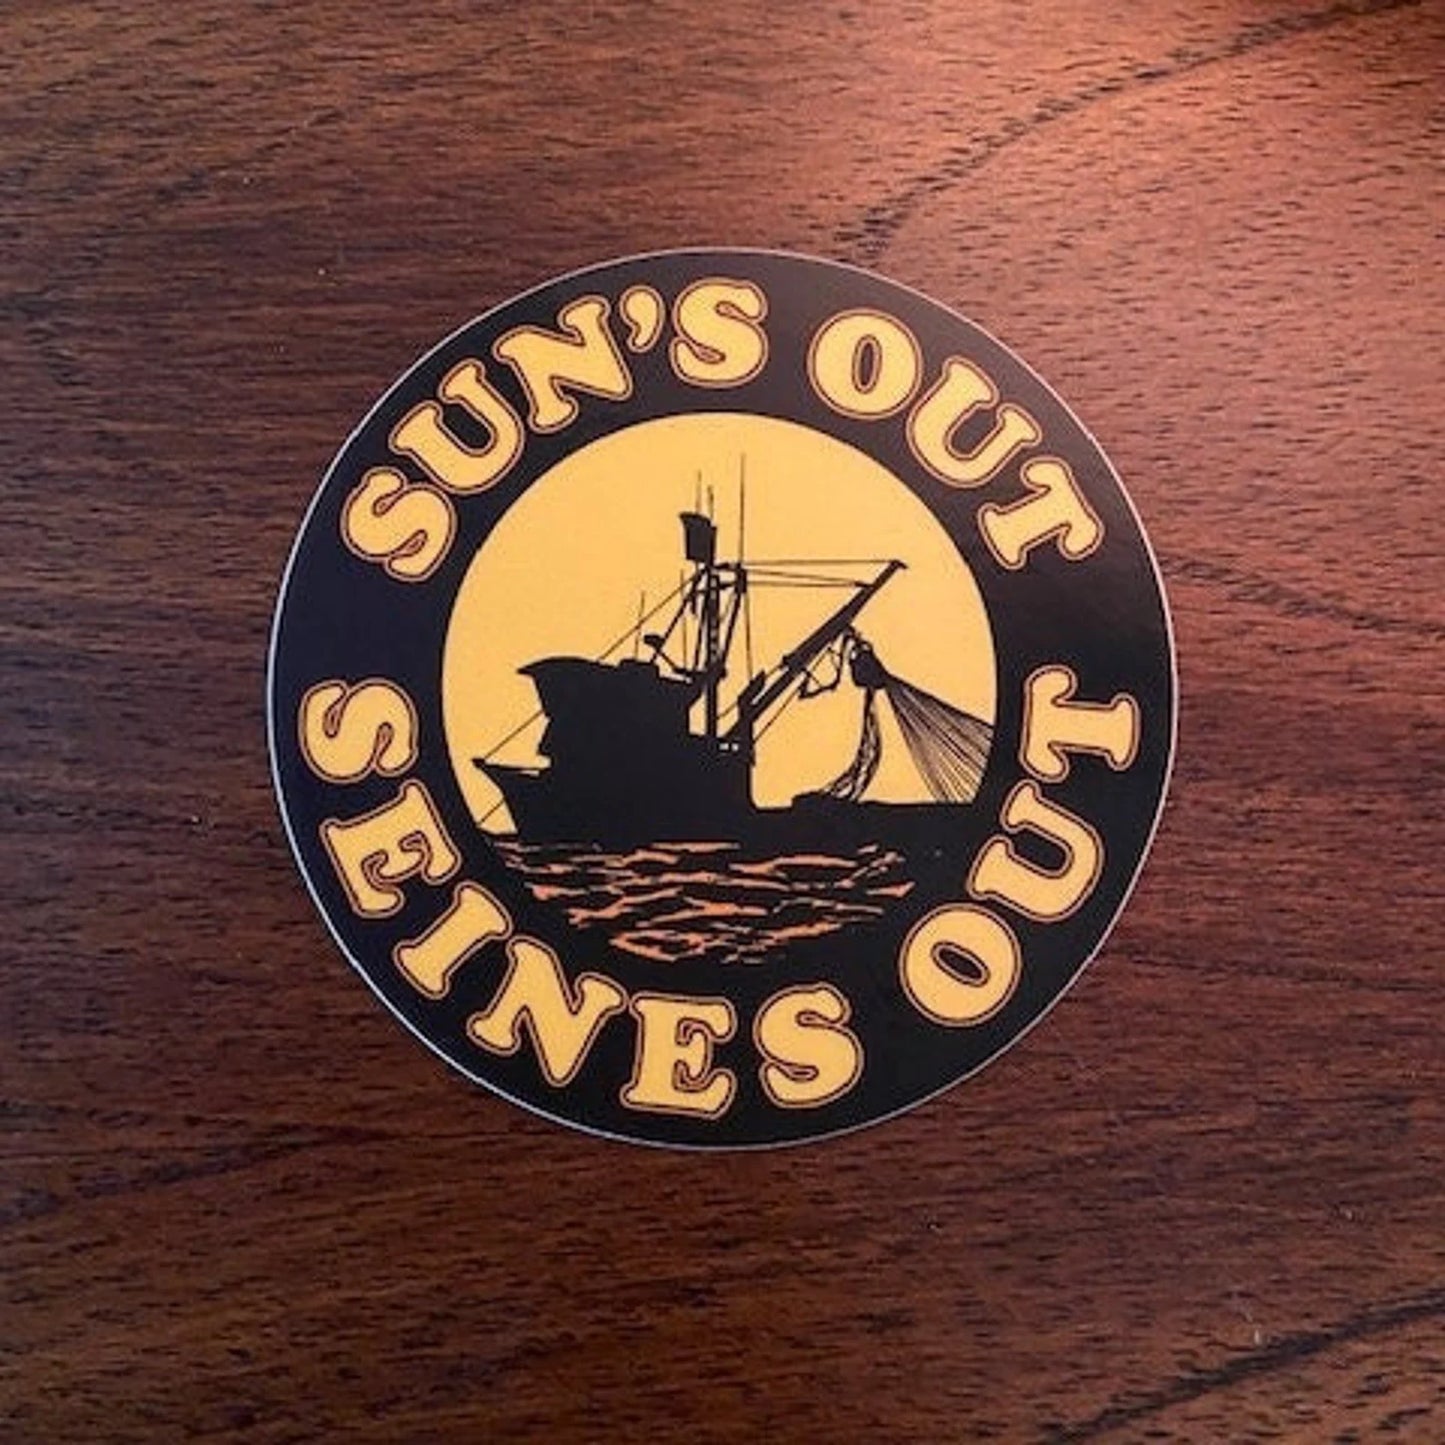 Sun's Out Seines Out - Waterproof Sticker